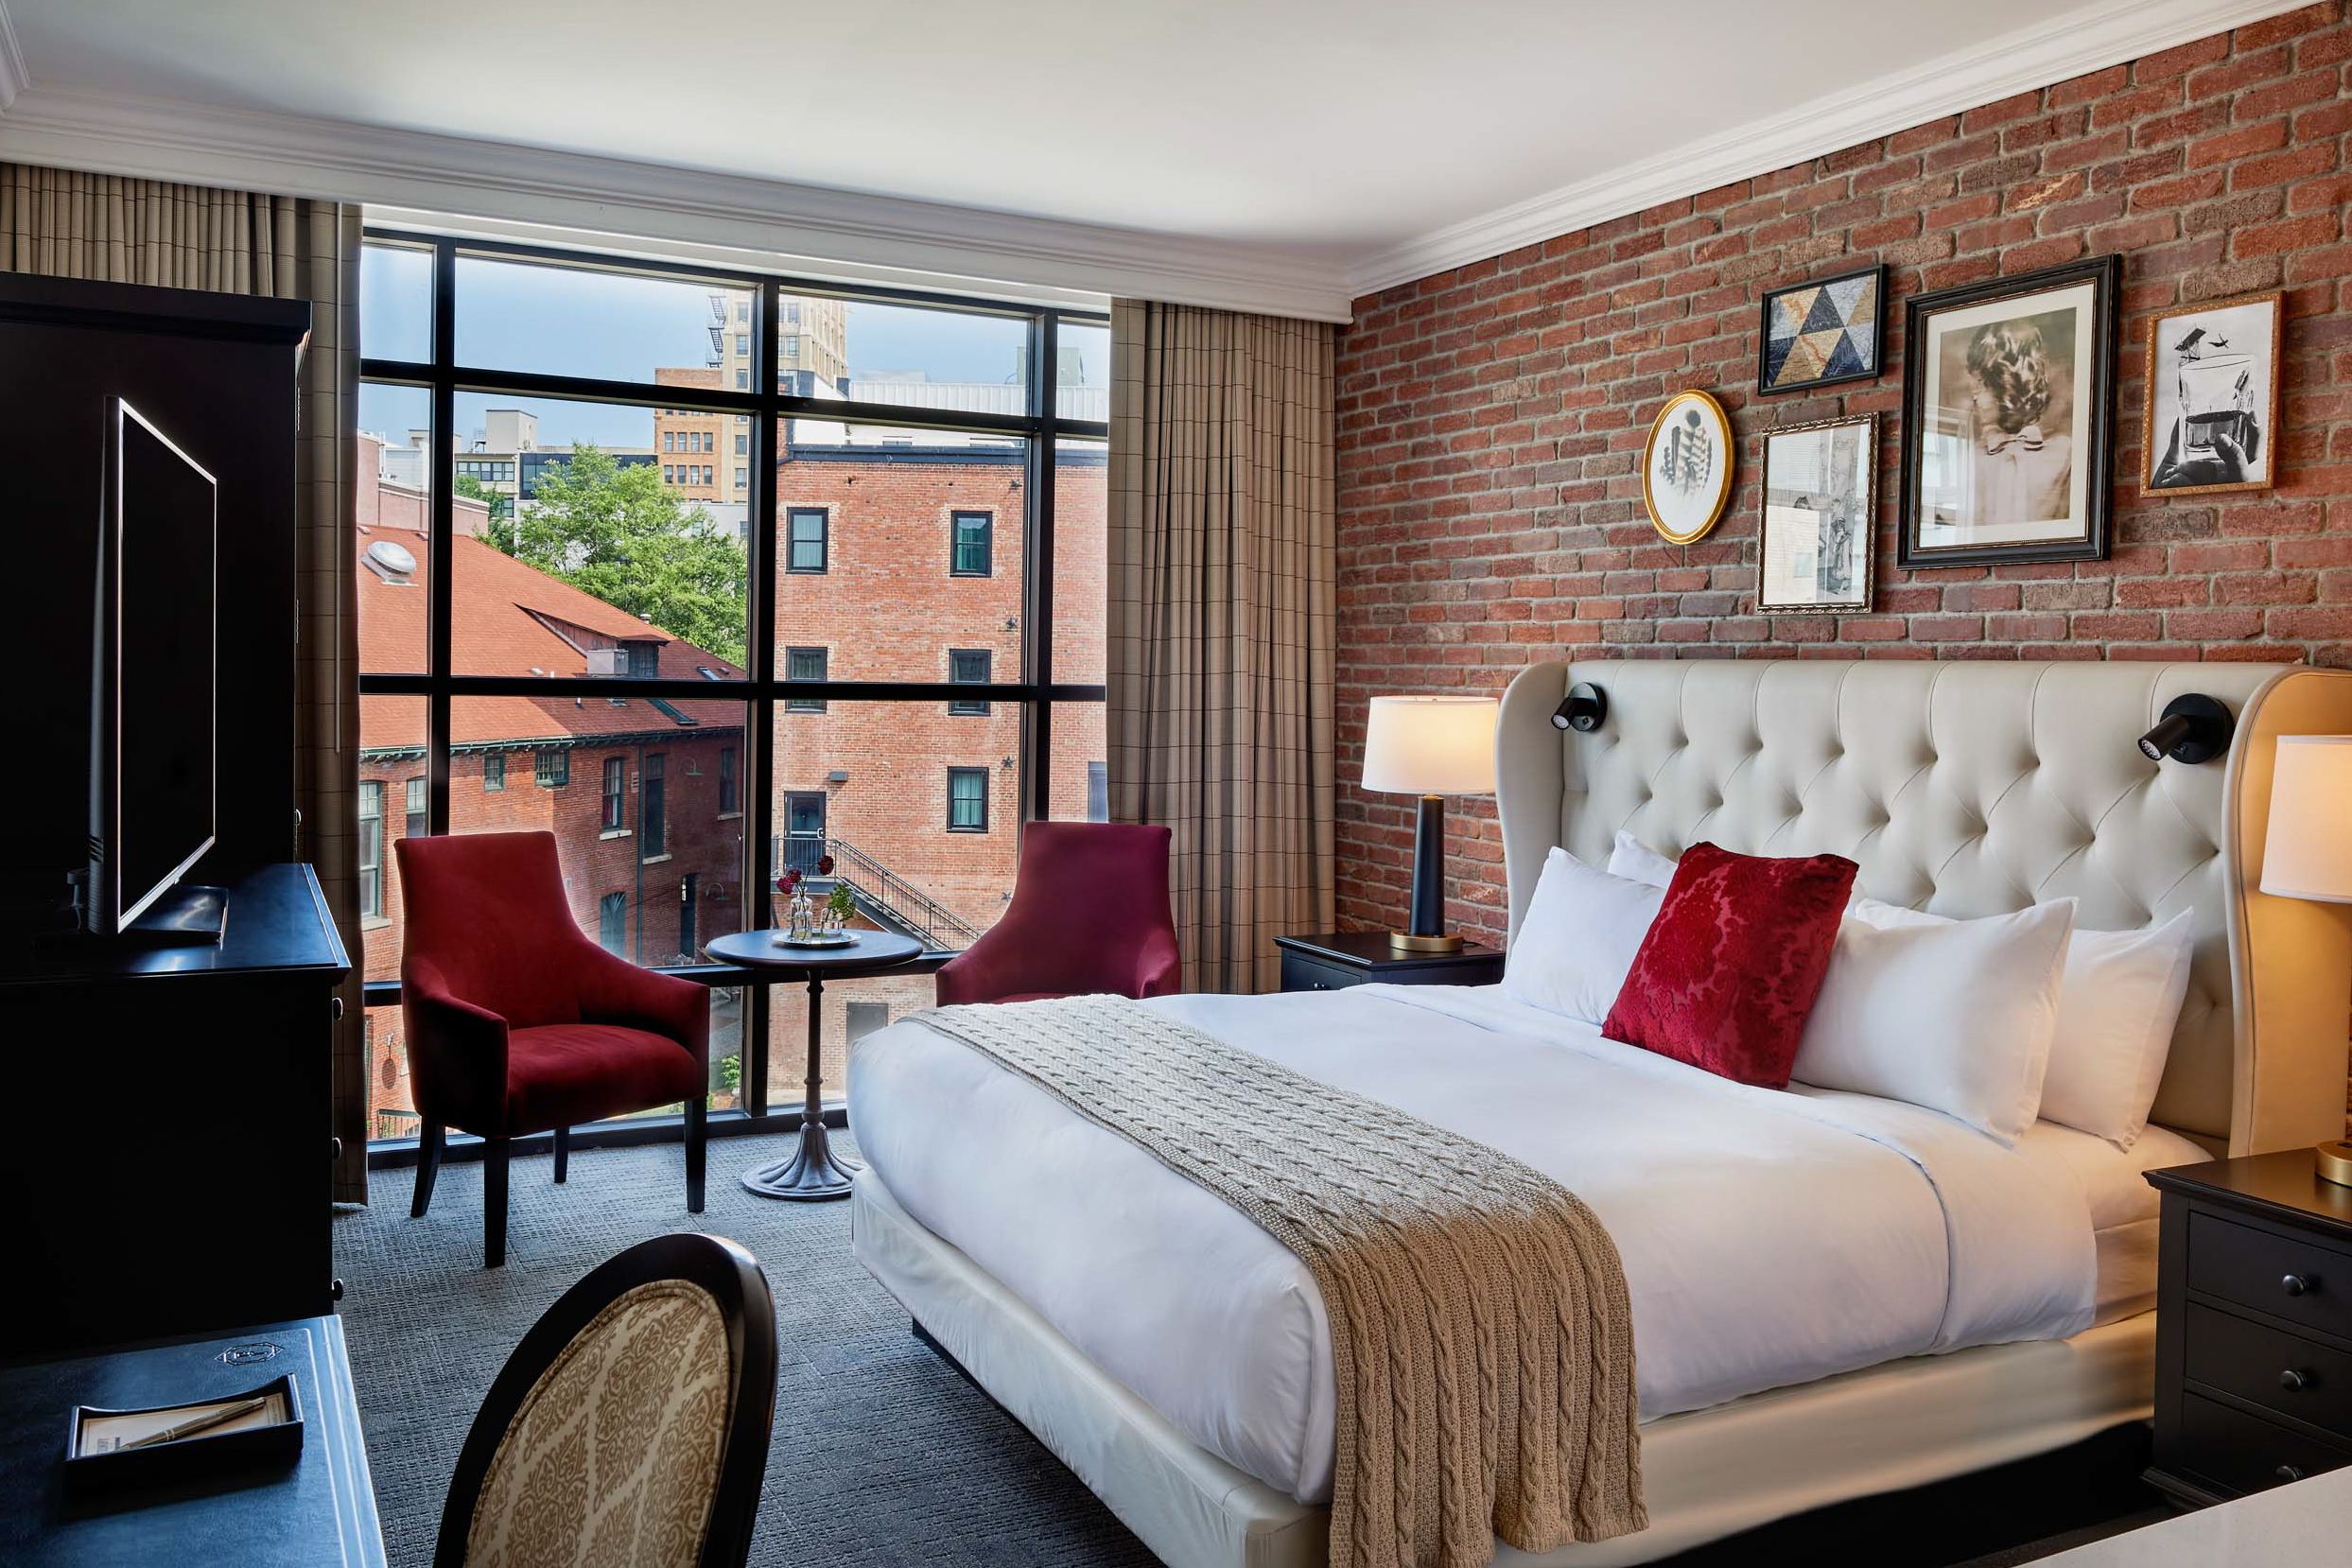 King Bedroom at Foundy Hotel in Asheville with large bed in the center of a brick wall and two velvet red chairs